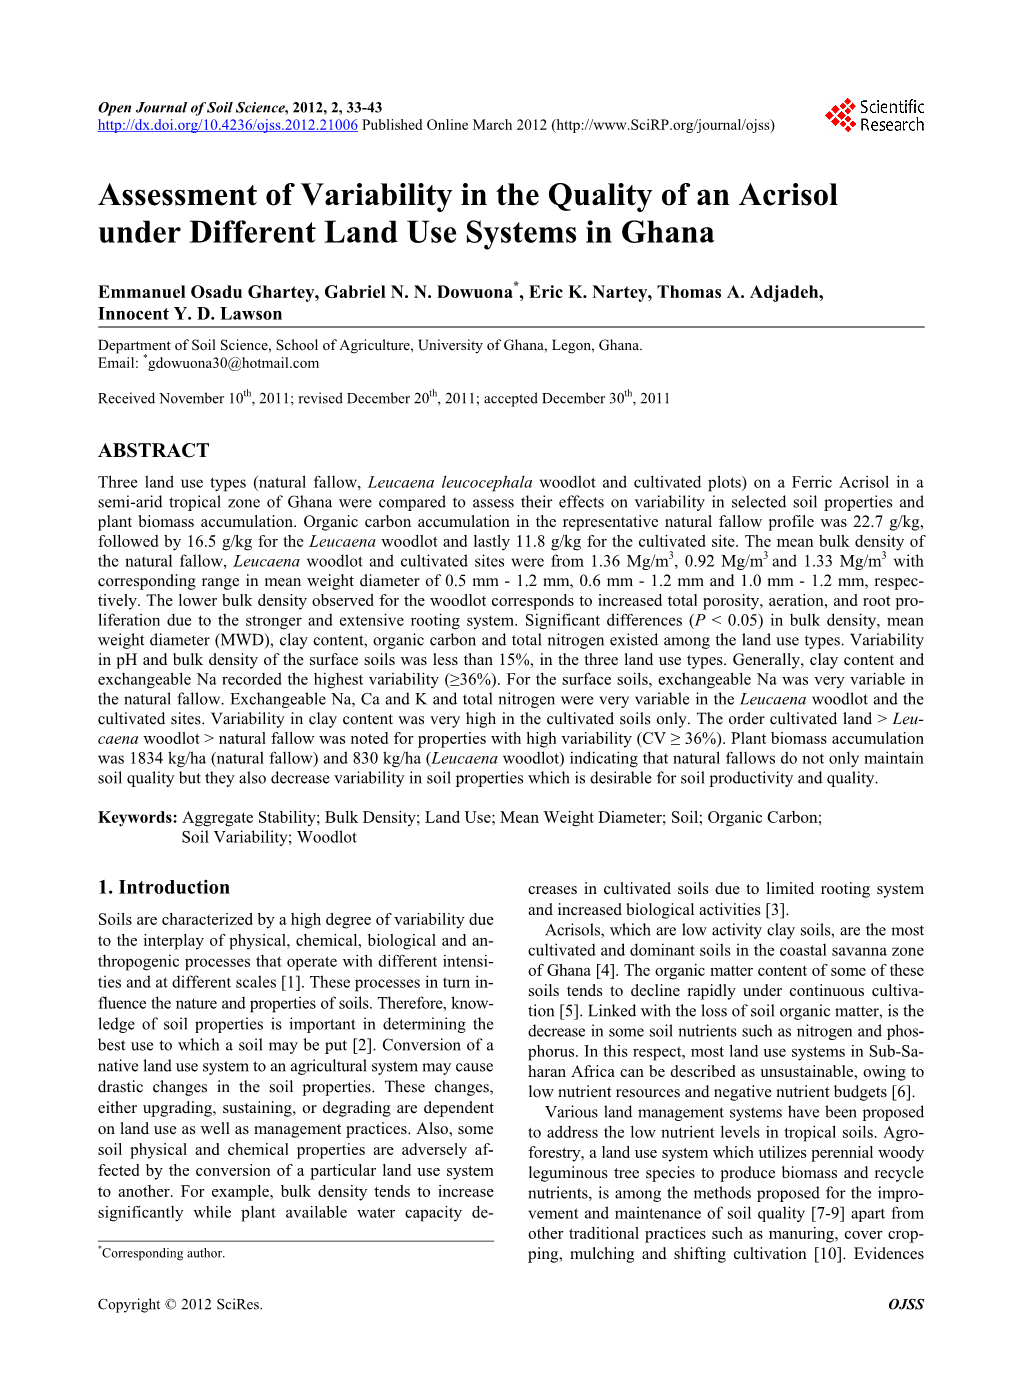 Assessment of Variability in the Quality of an Acrisol Under Different Land Use Systems in Ghana